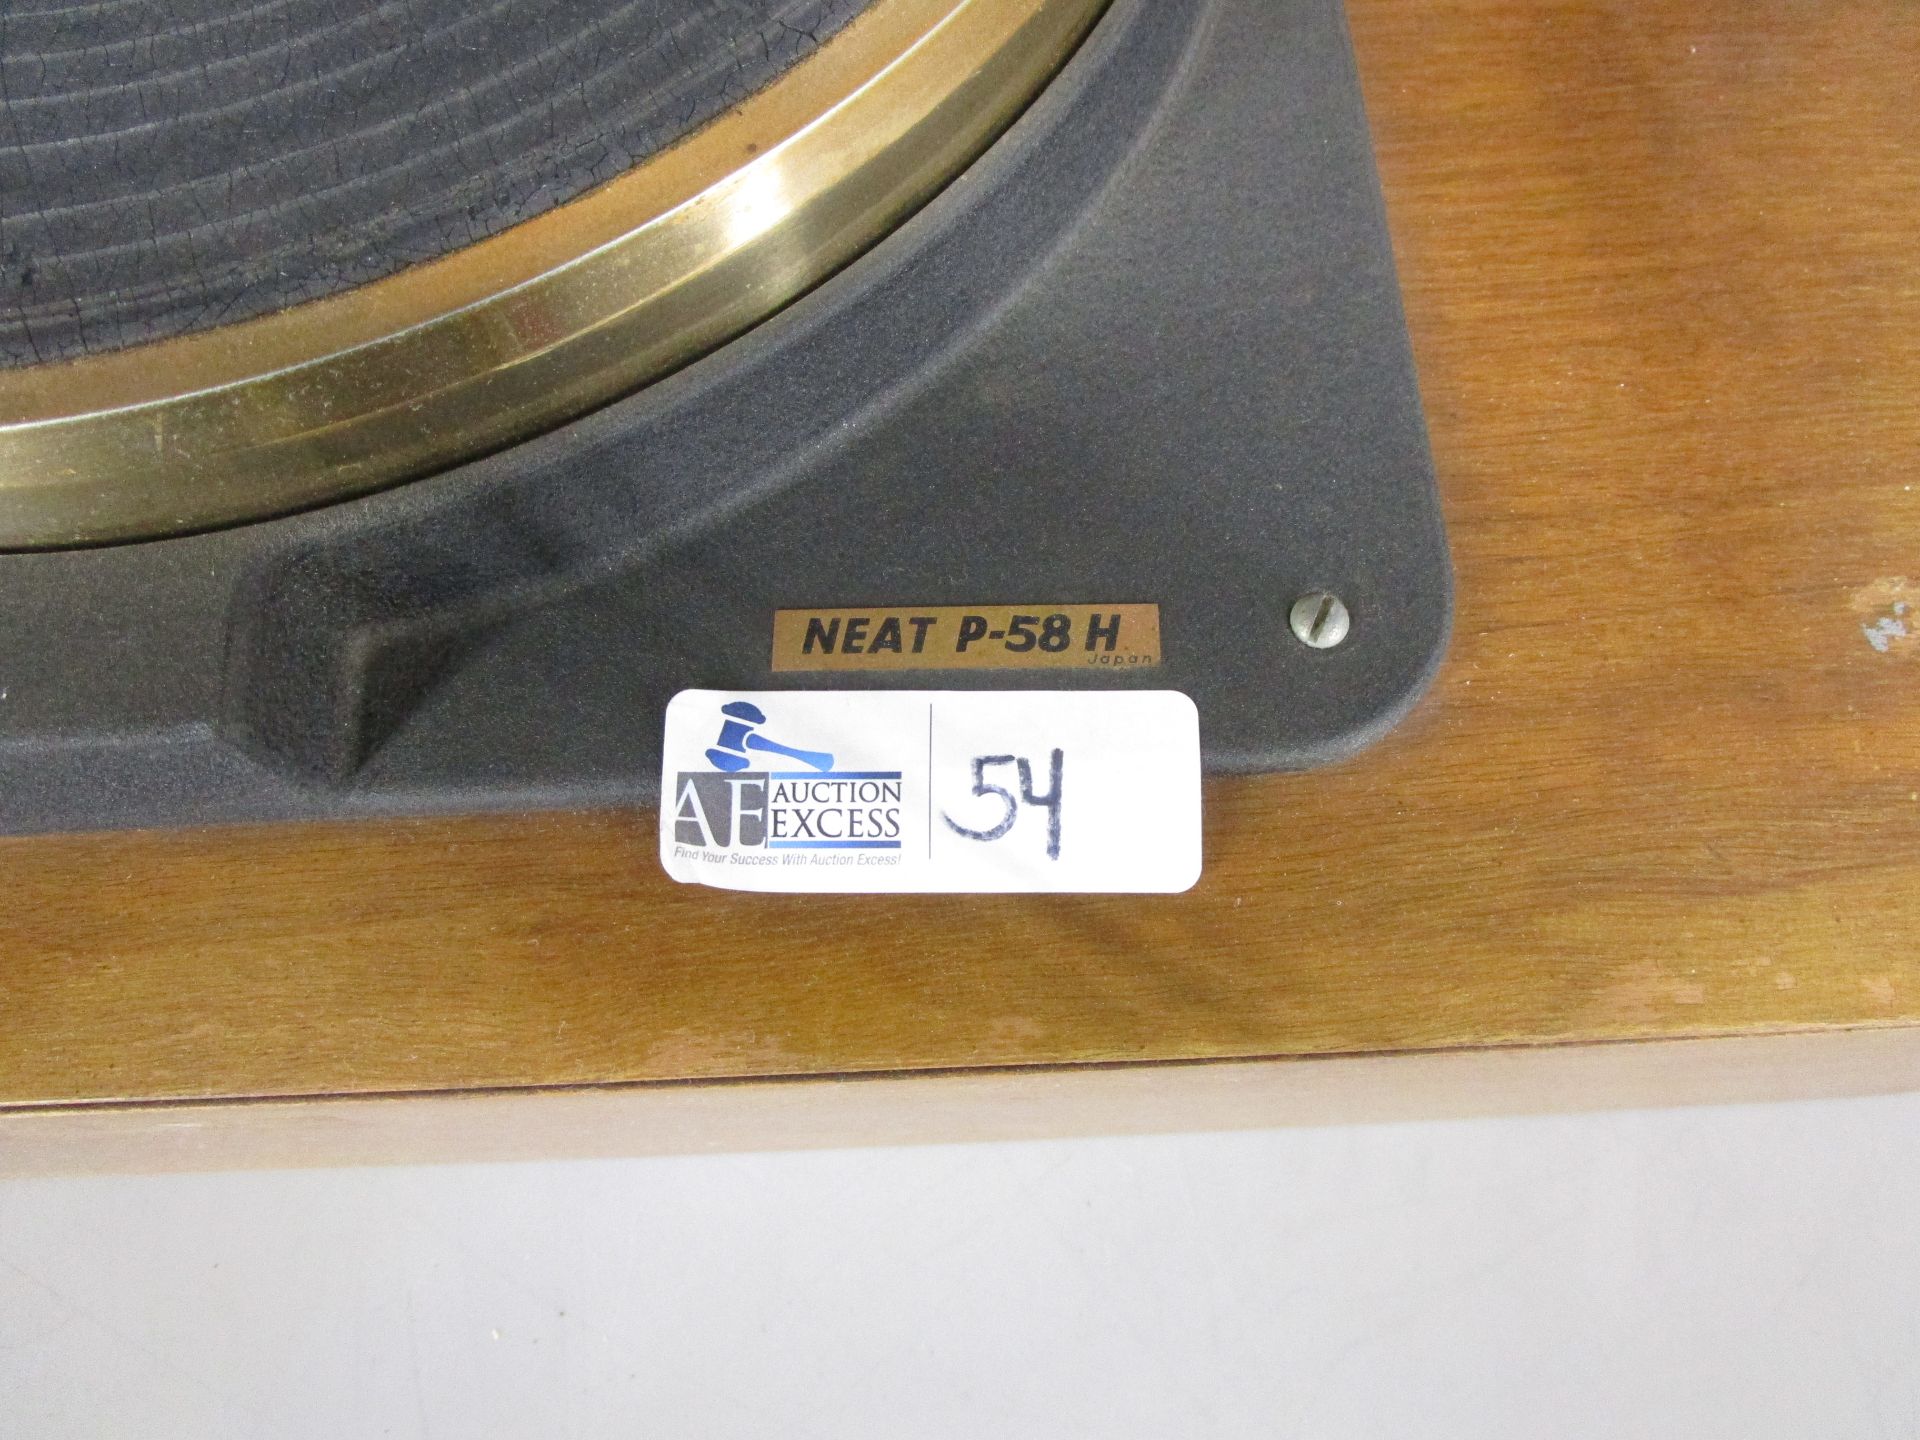 NEAT P-58 H TURNTABLE WITH SHURE TONEARM - Image 3 of 5